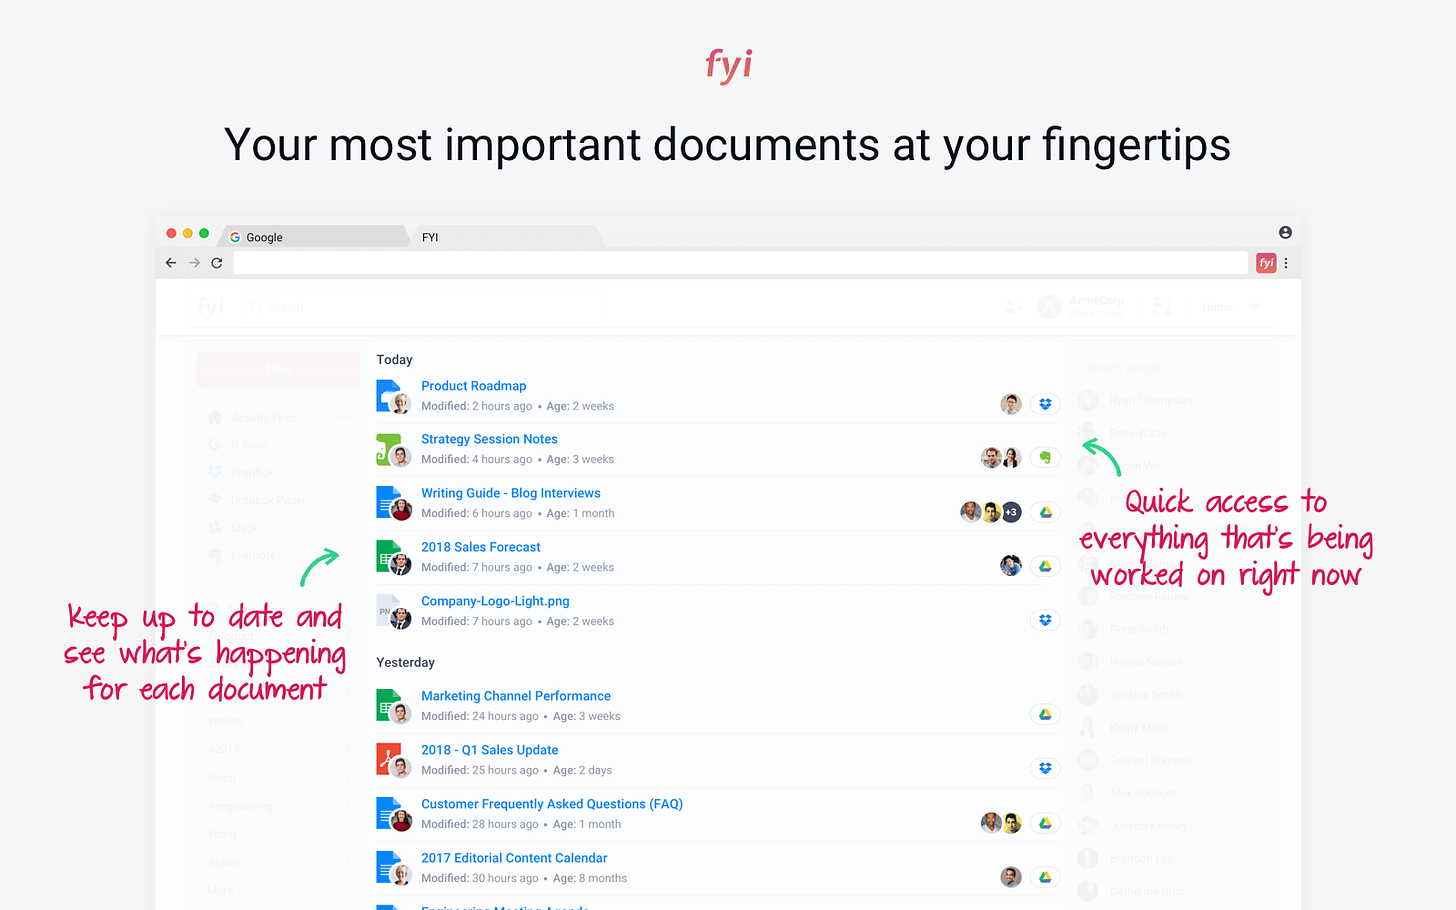 Find your documents in 3 clicks or less across all the tools you use